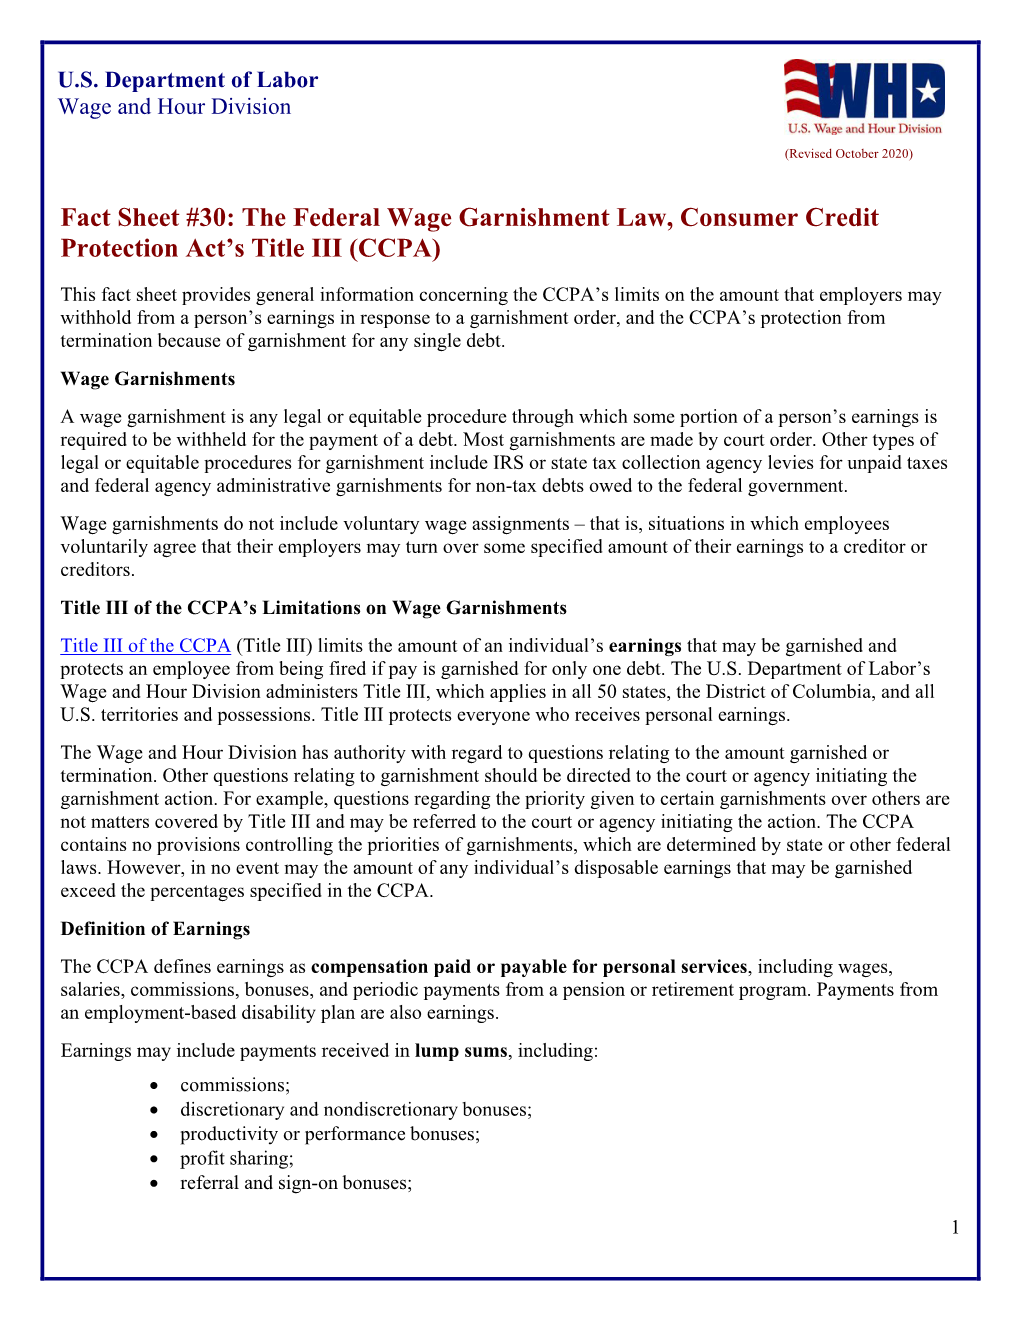 Fact Sheet #30: the Federal Wage Garnishment Law, Consumer Credit Protection Act’S Title III (CCPA)